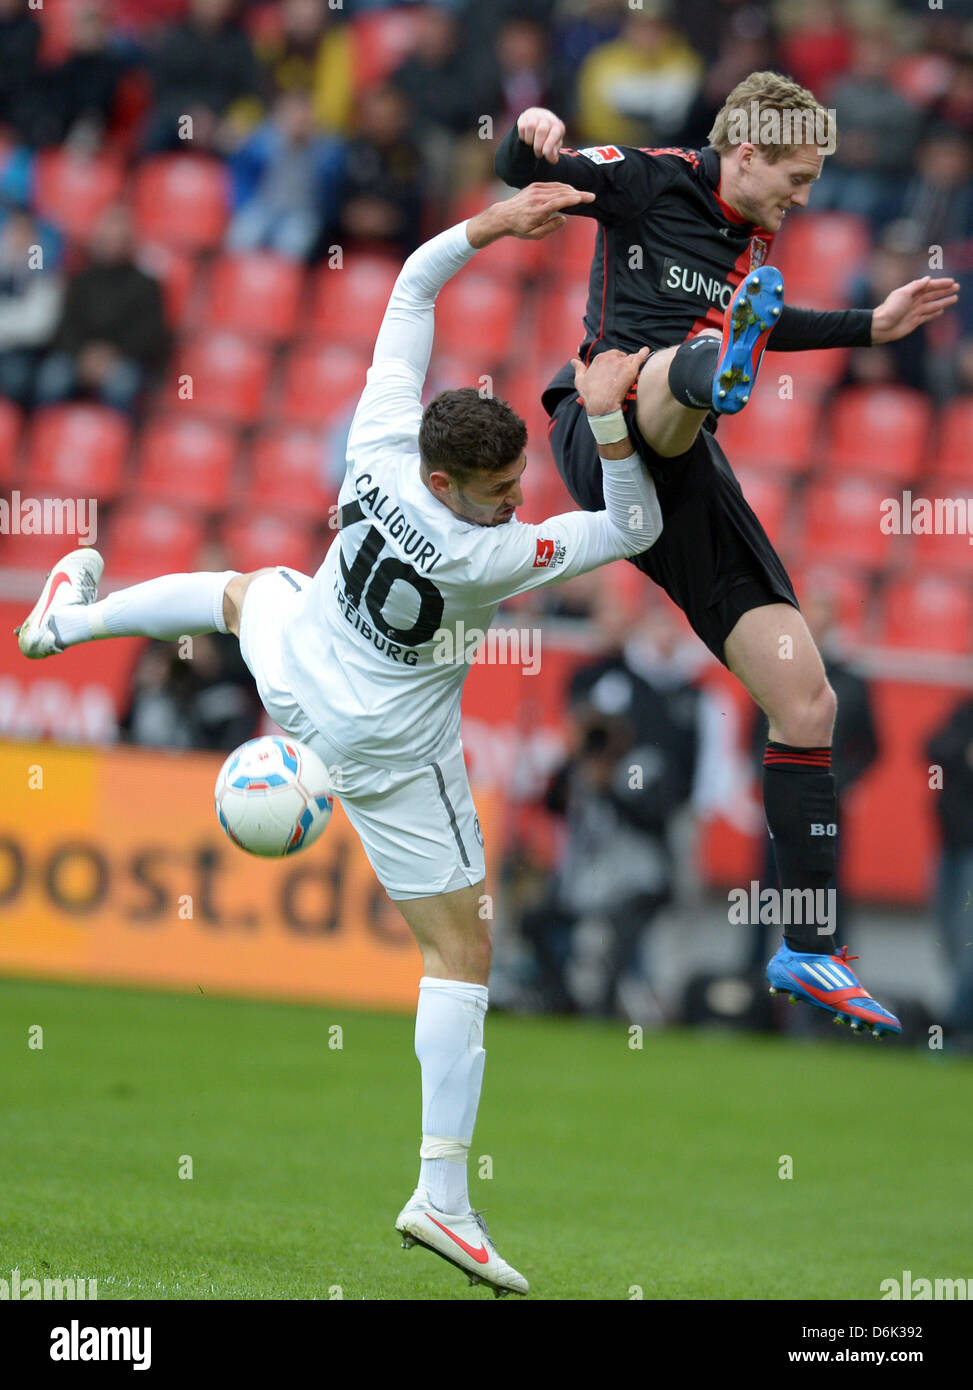 Leverkusen's Andre Schuerrle (R) vies for the ball with Freiburg's Daniel Caligiuri during the German Bundesliga match between Bayer Leverkusen and SC Freiburg at the BayArena in Leverkusen, Germany, 31 March 2012. Photo: FEDERICO GAMBARINI  (ATTENTION: EMBARGO CONDITIONS! The DFL permits the further  utilisation of the pictures in IPTV, mobile services and other new  technologies  Stock Photo